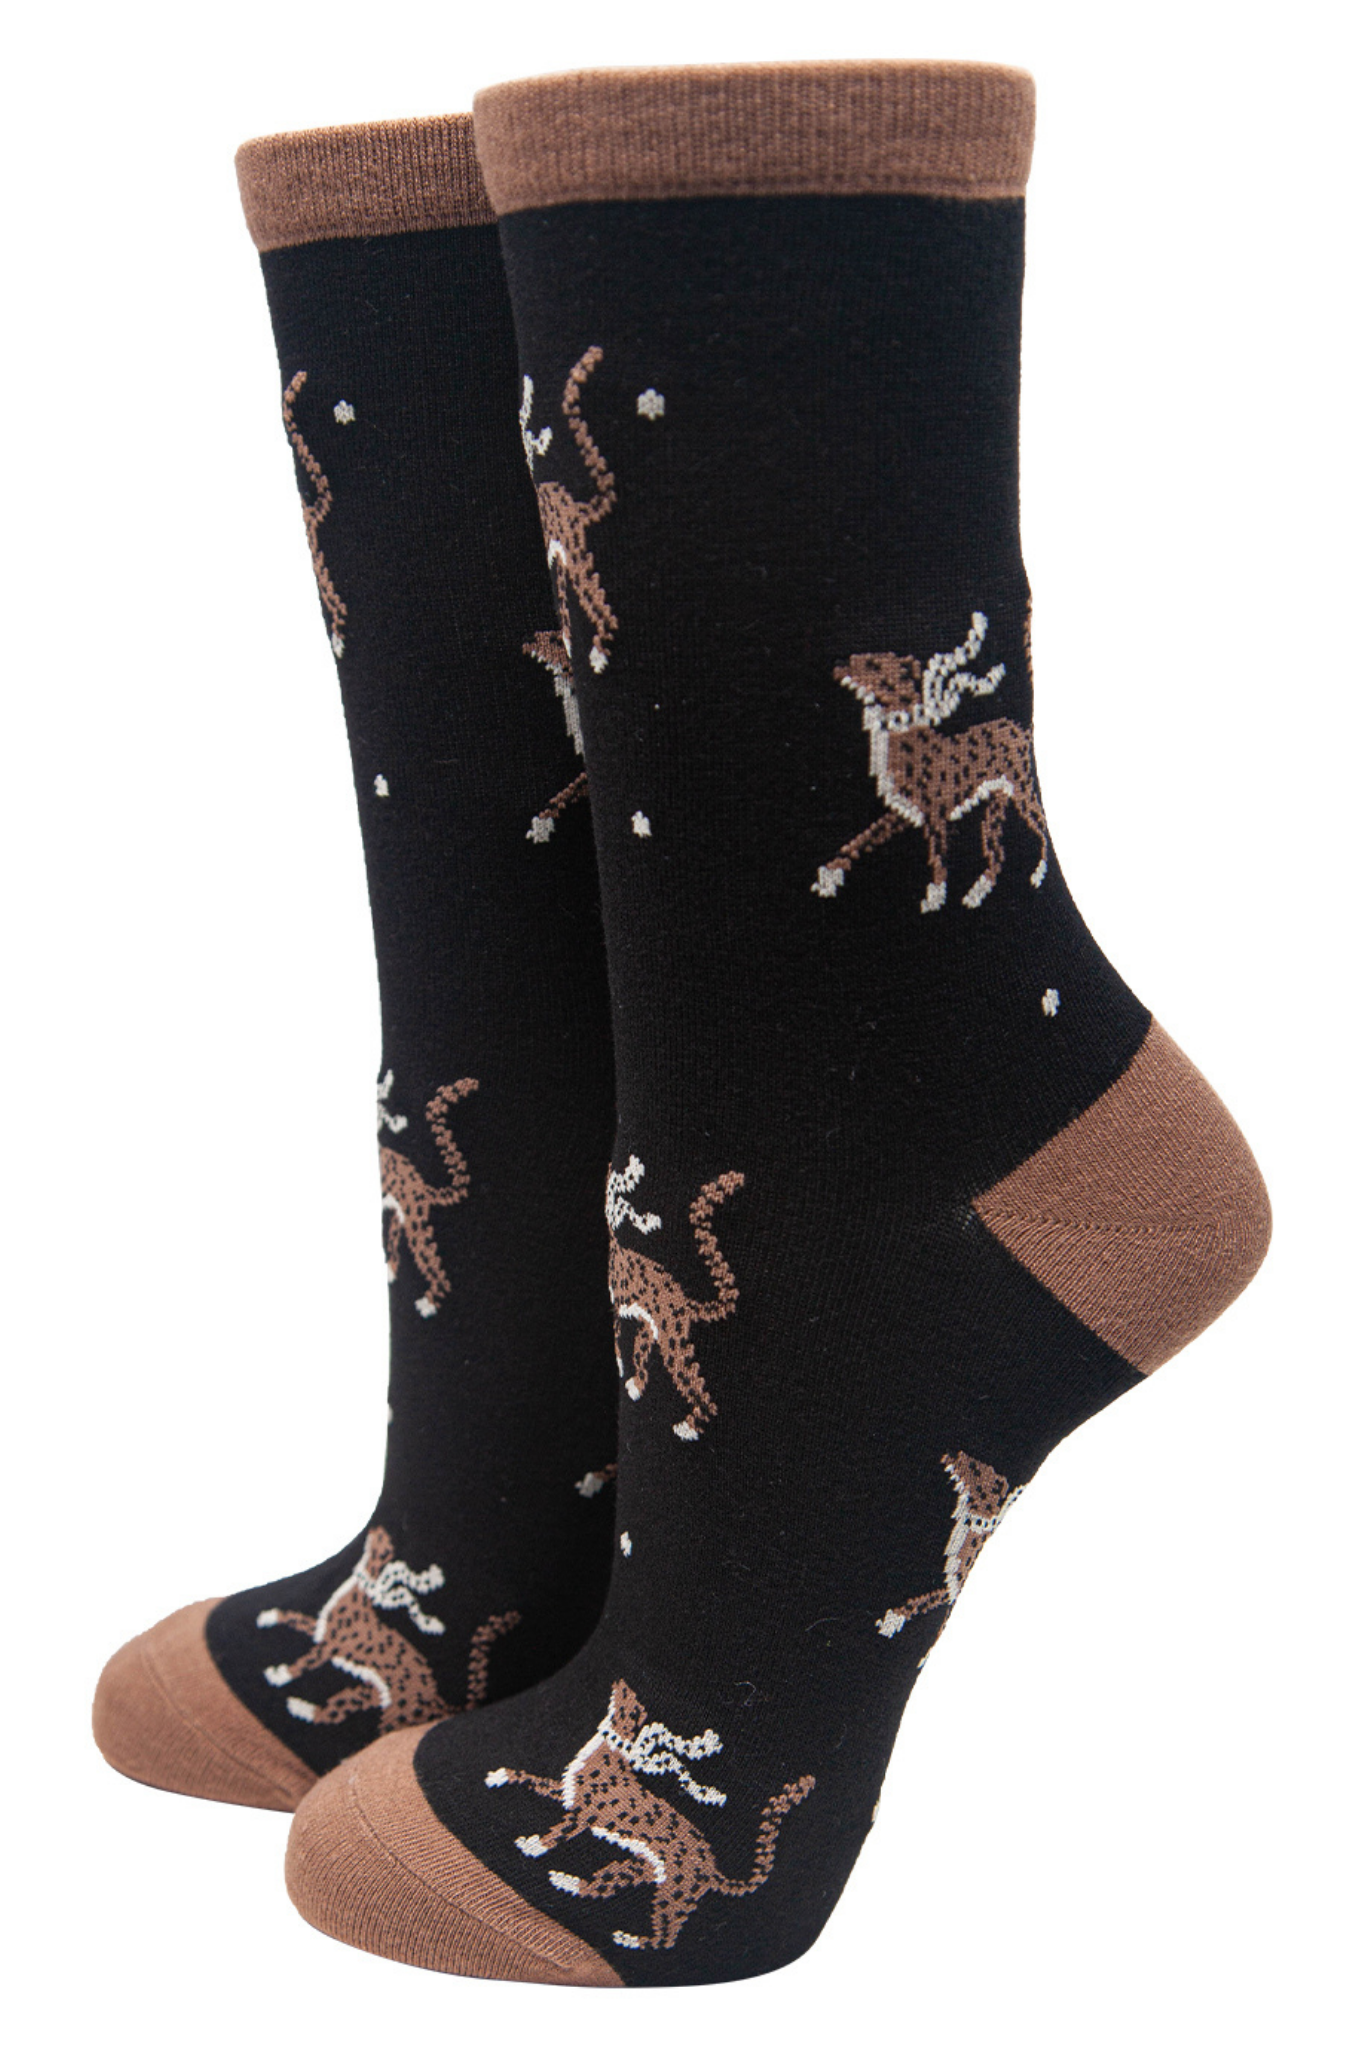 black ankle socks with brown Cheetah cats 